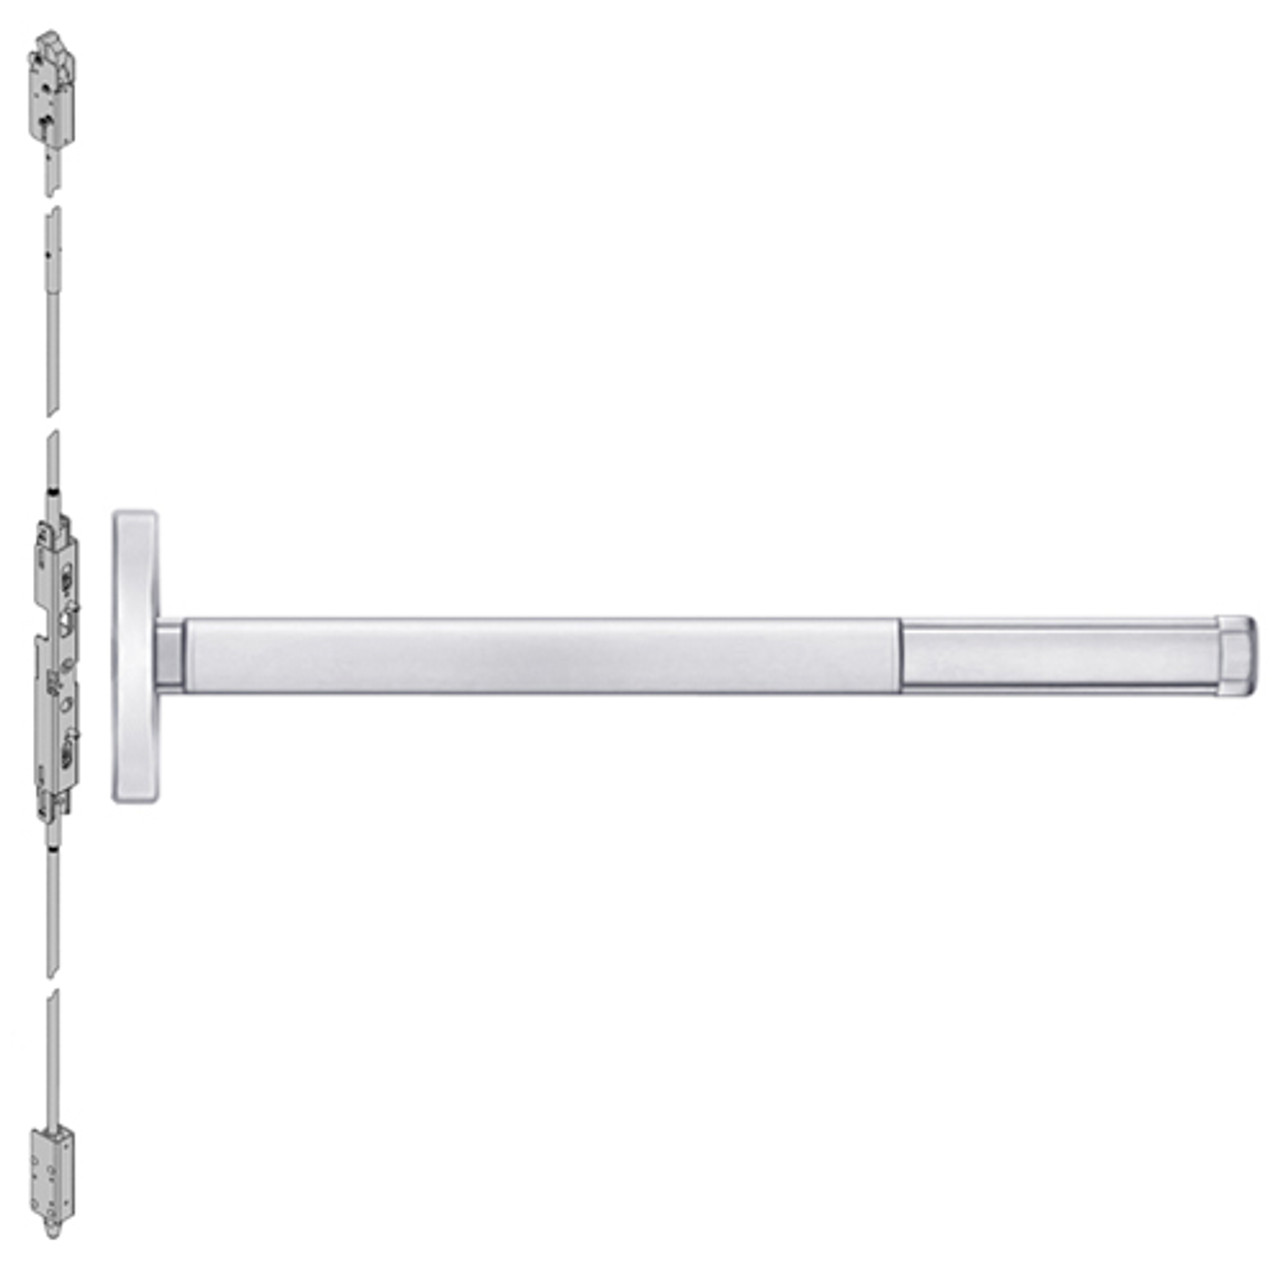 2602-625-36 PHI 2600 Series Non Fire Rated Concealed Vertical Rod Exit Device Prepped for Dummy Trim in Bright Chrome Finish